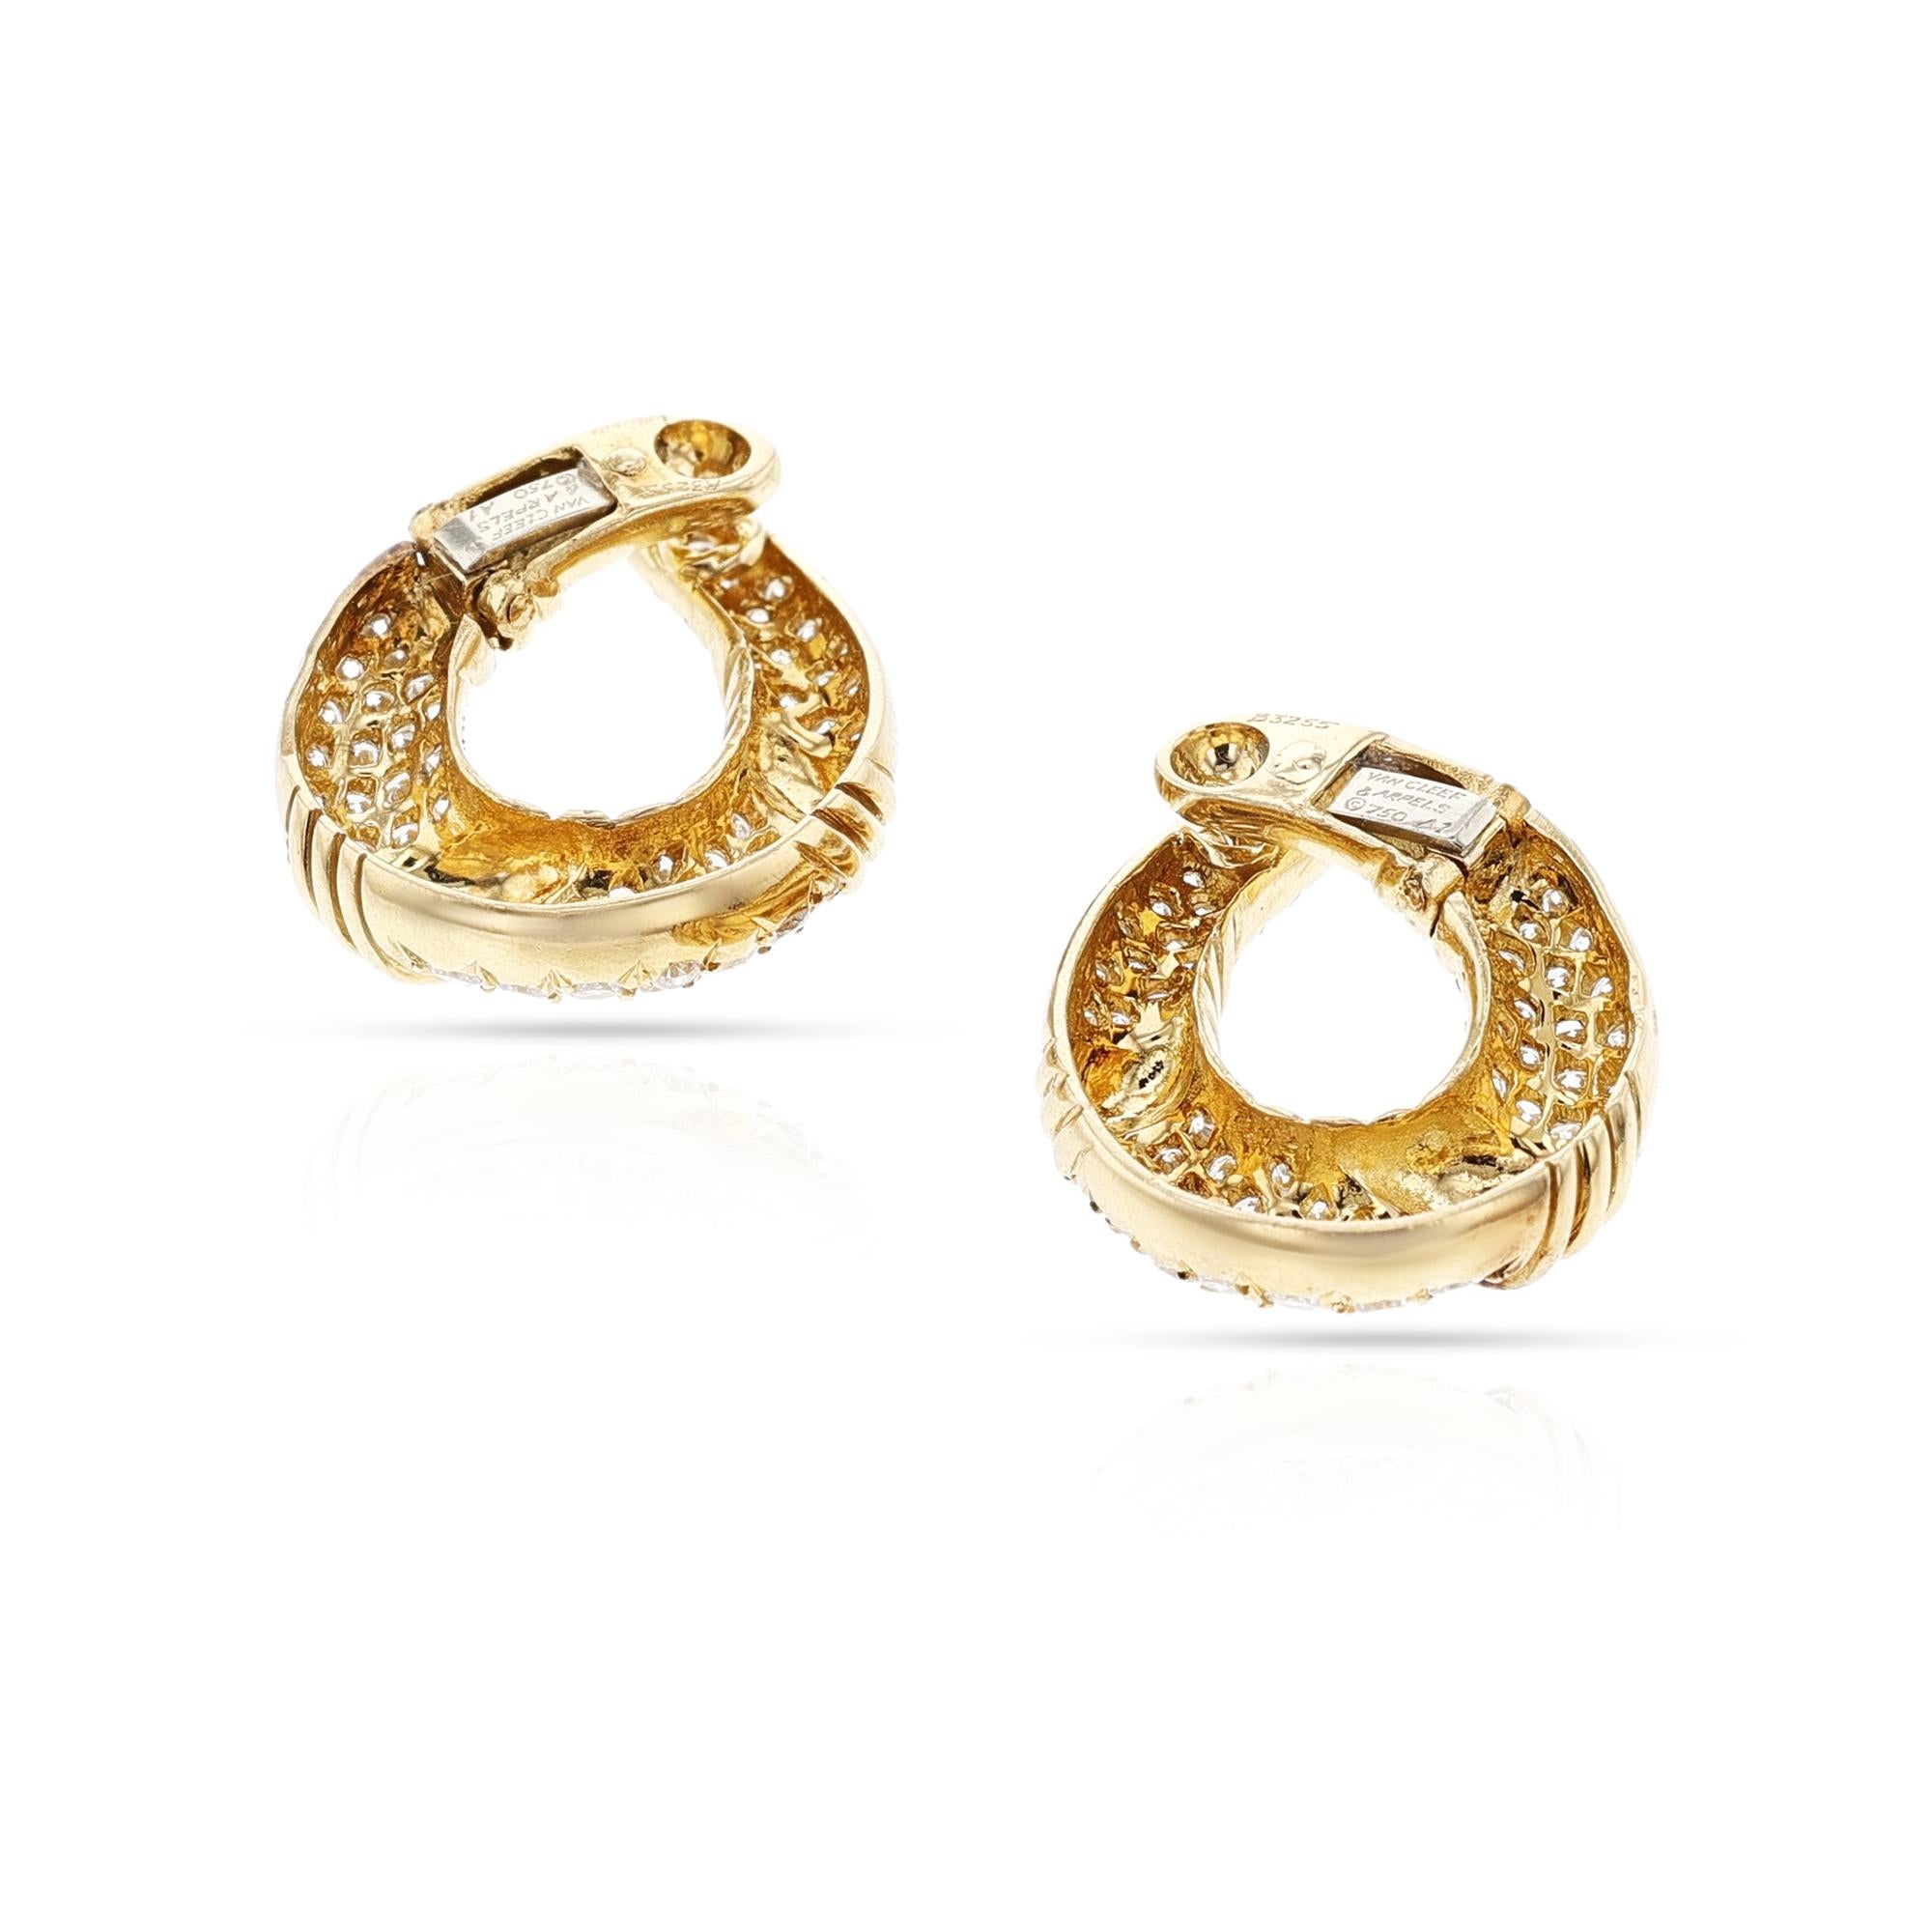 Round Cut Van Cleef & Arpels Gold and Diamond Earrings, 18k For Sale